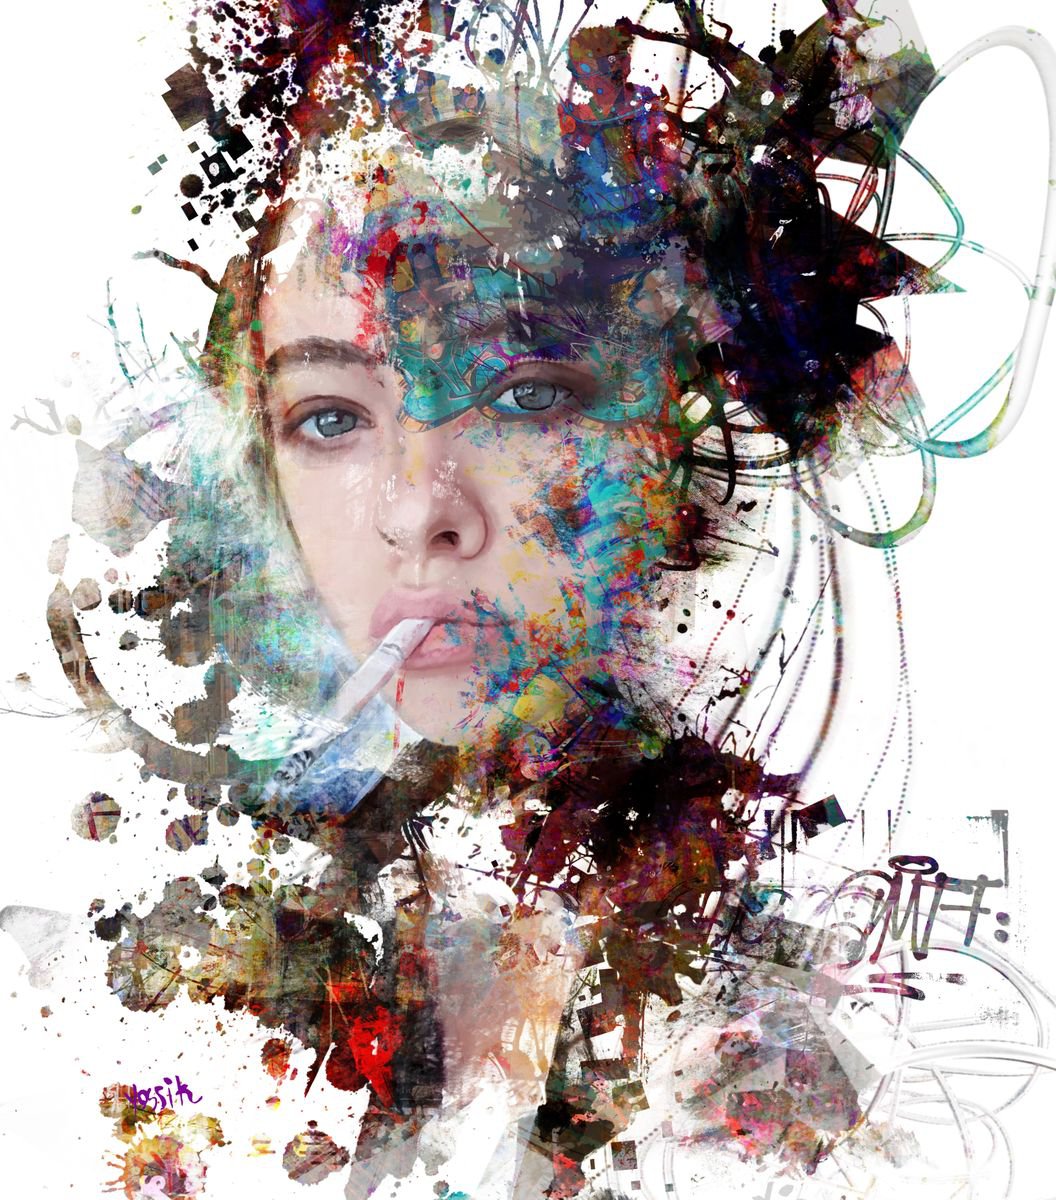 defiance 3 by Yossi Kotler